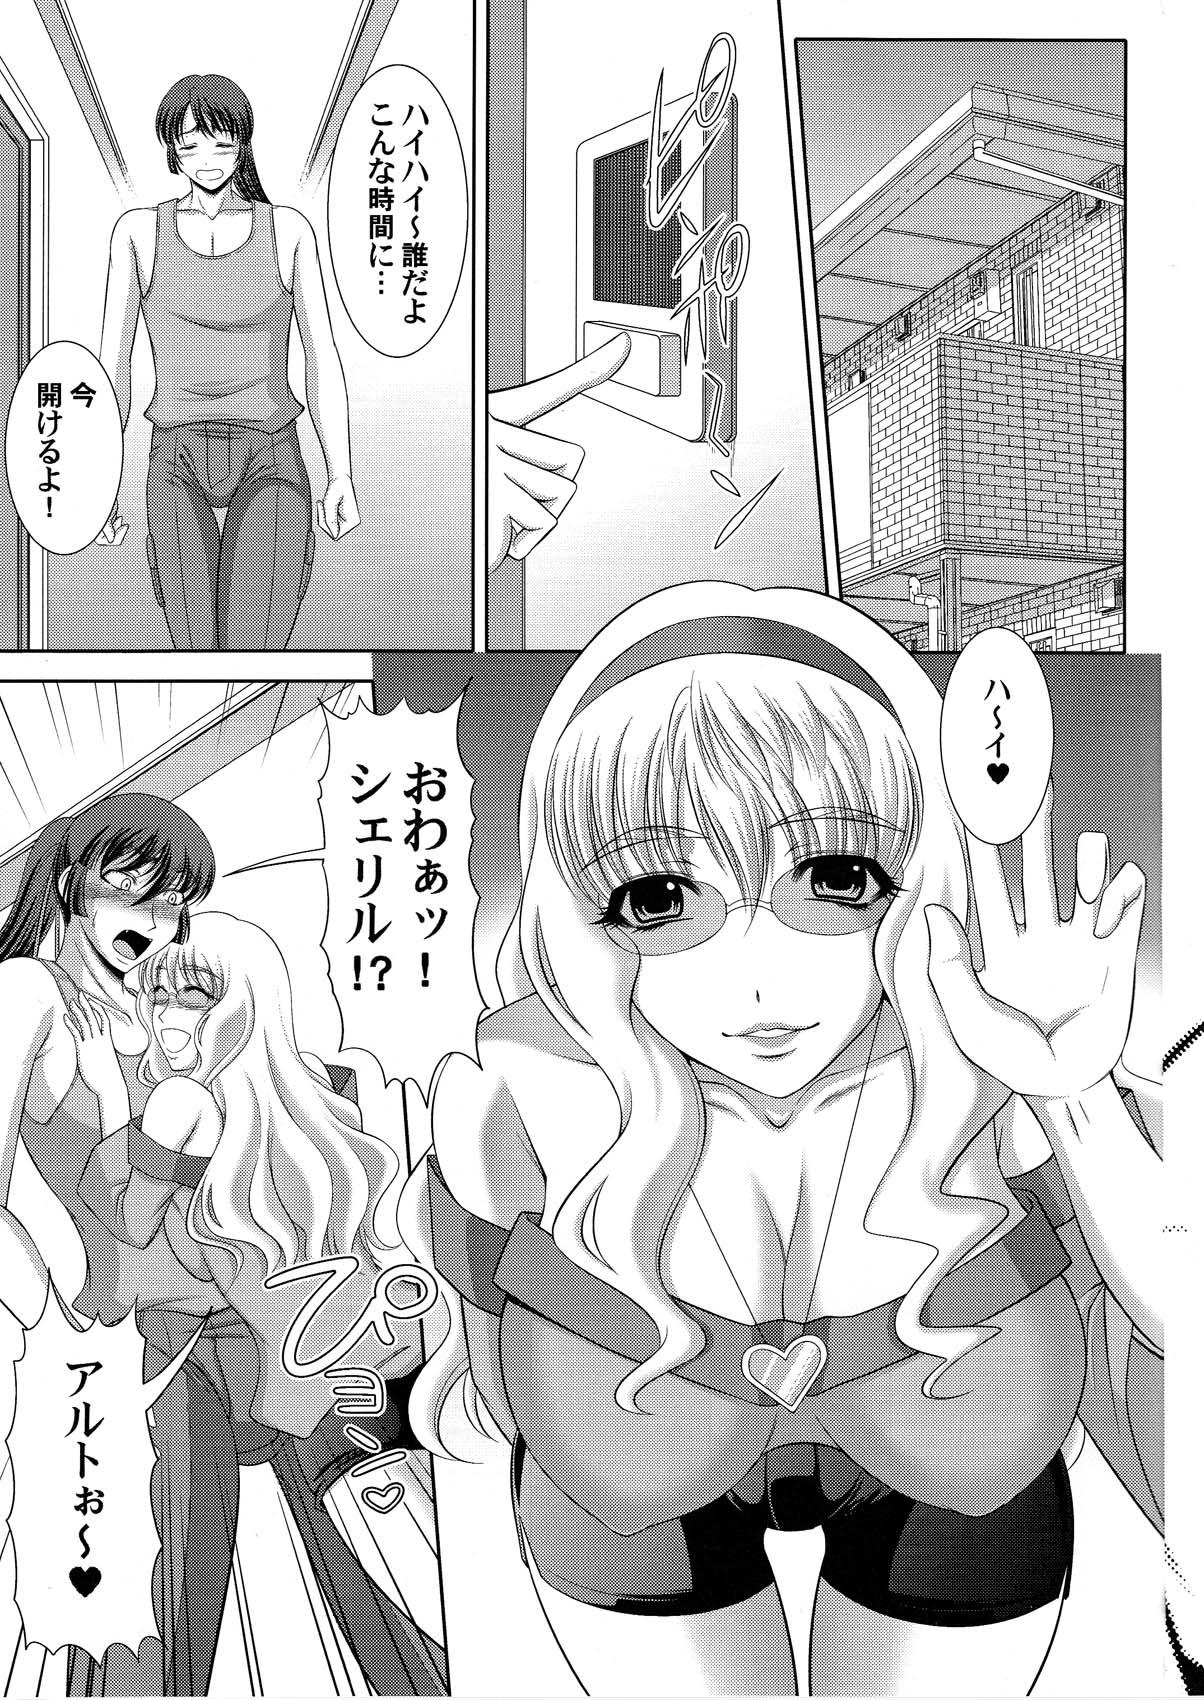 Caught Fairy Assault - Macross frontier Interacial - Page 5